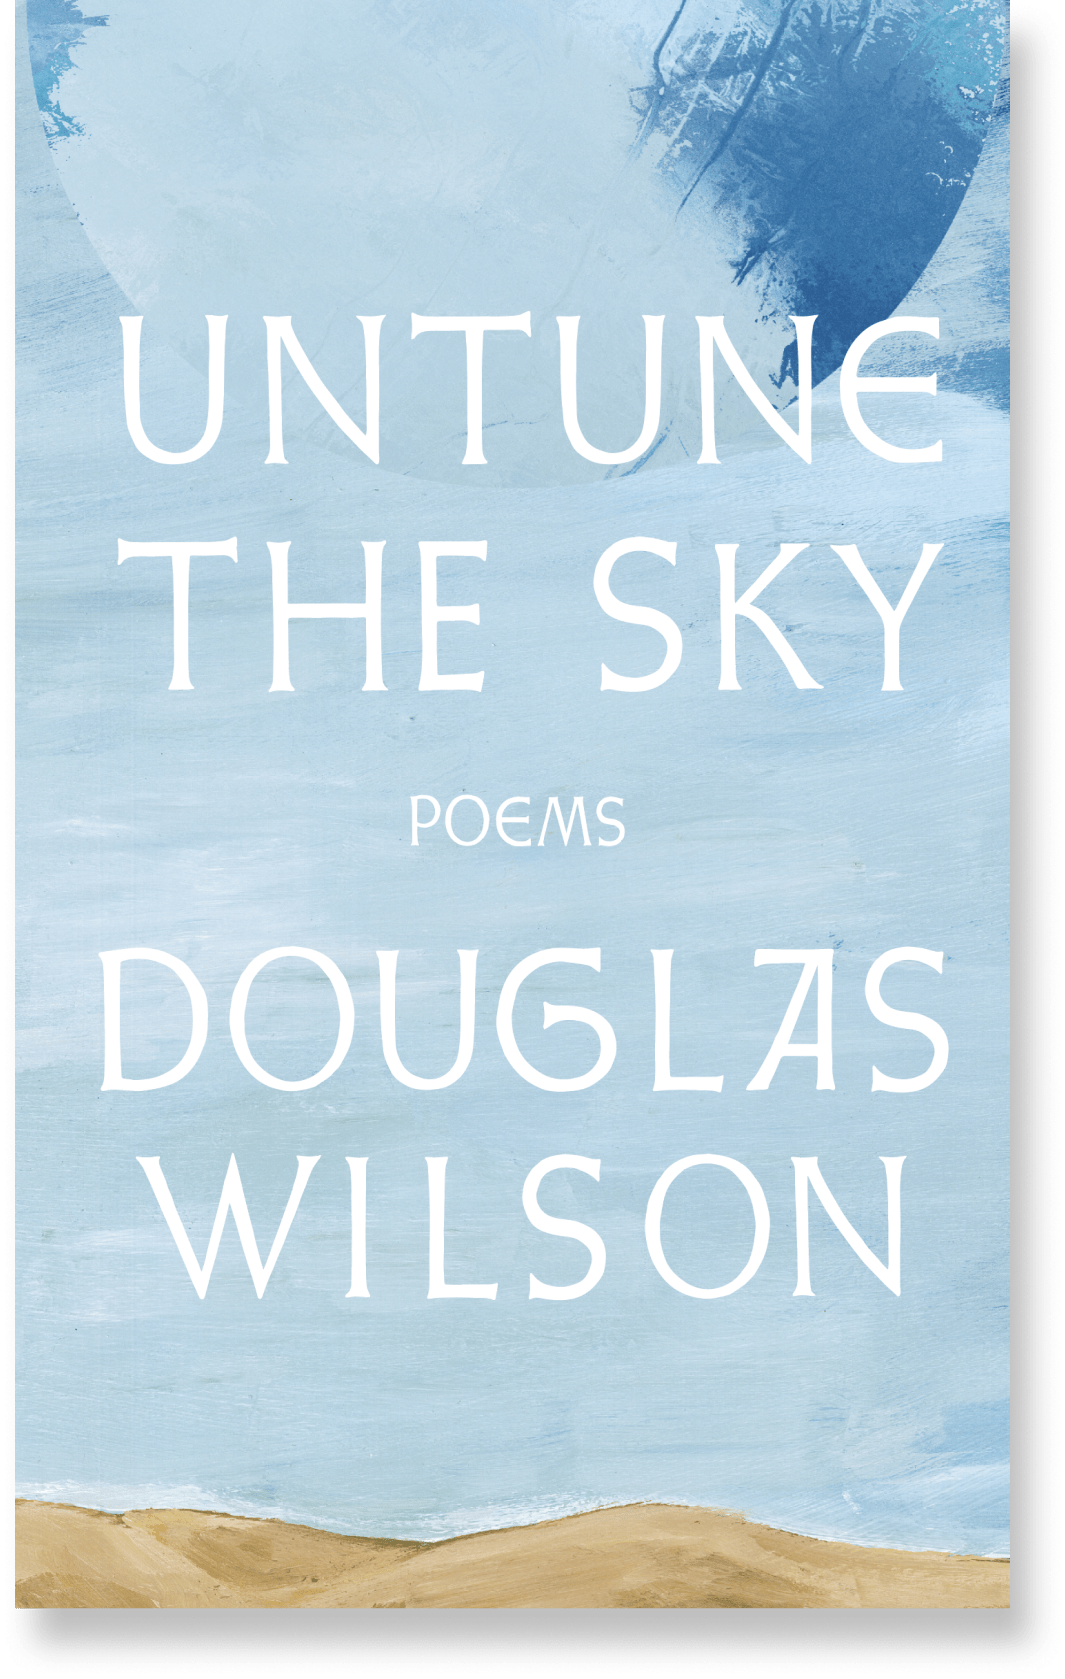 Untune the Sky: Occasional, Stammering Verse